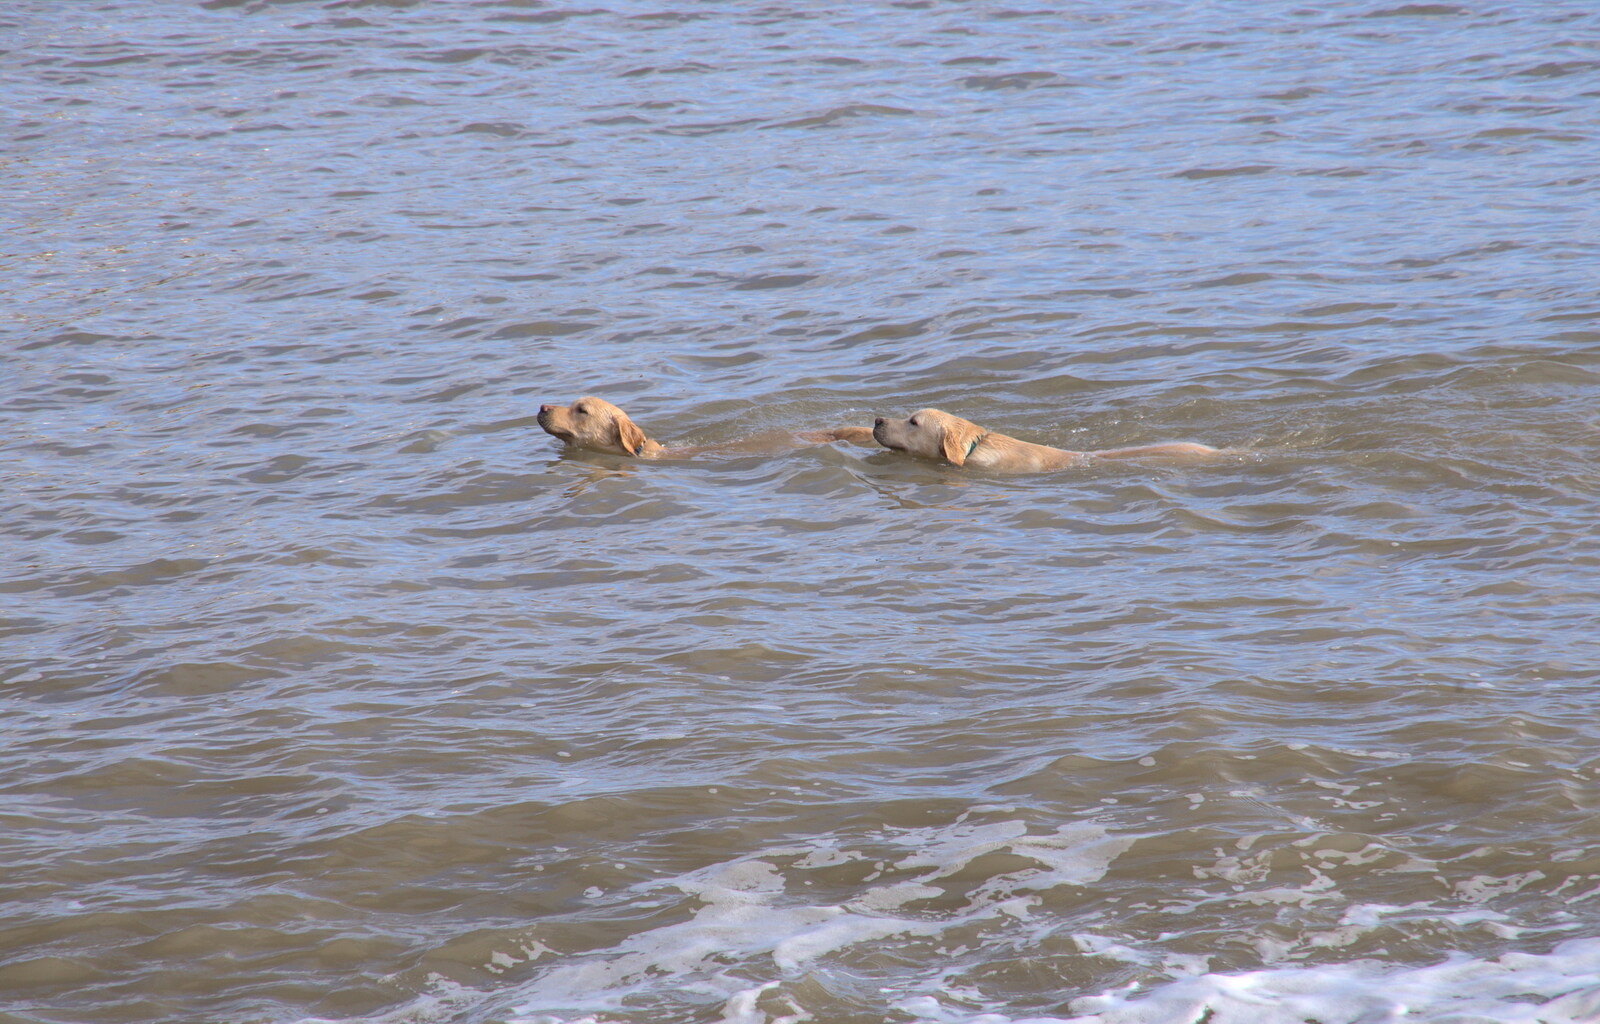 A couple of golden retrievers swim around from A Trip to the Amusements, Southwold Pier, Southwold, Suffolk - 5th November 2017